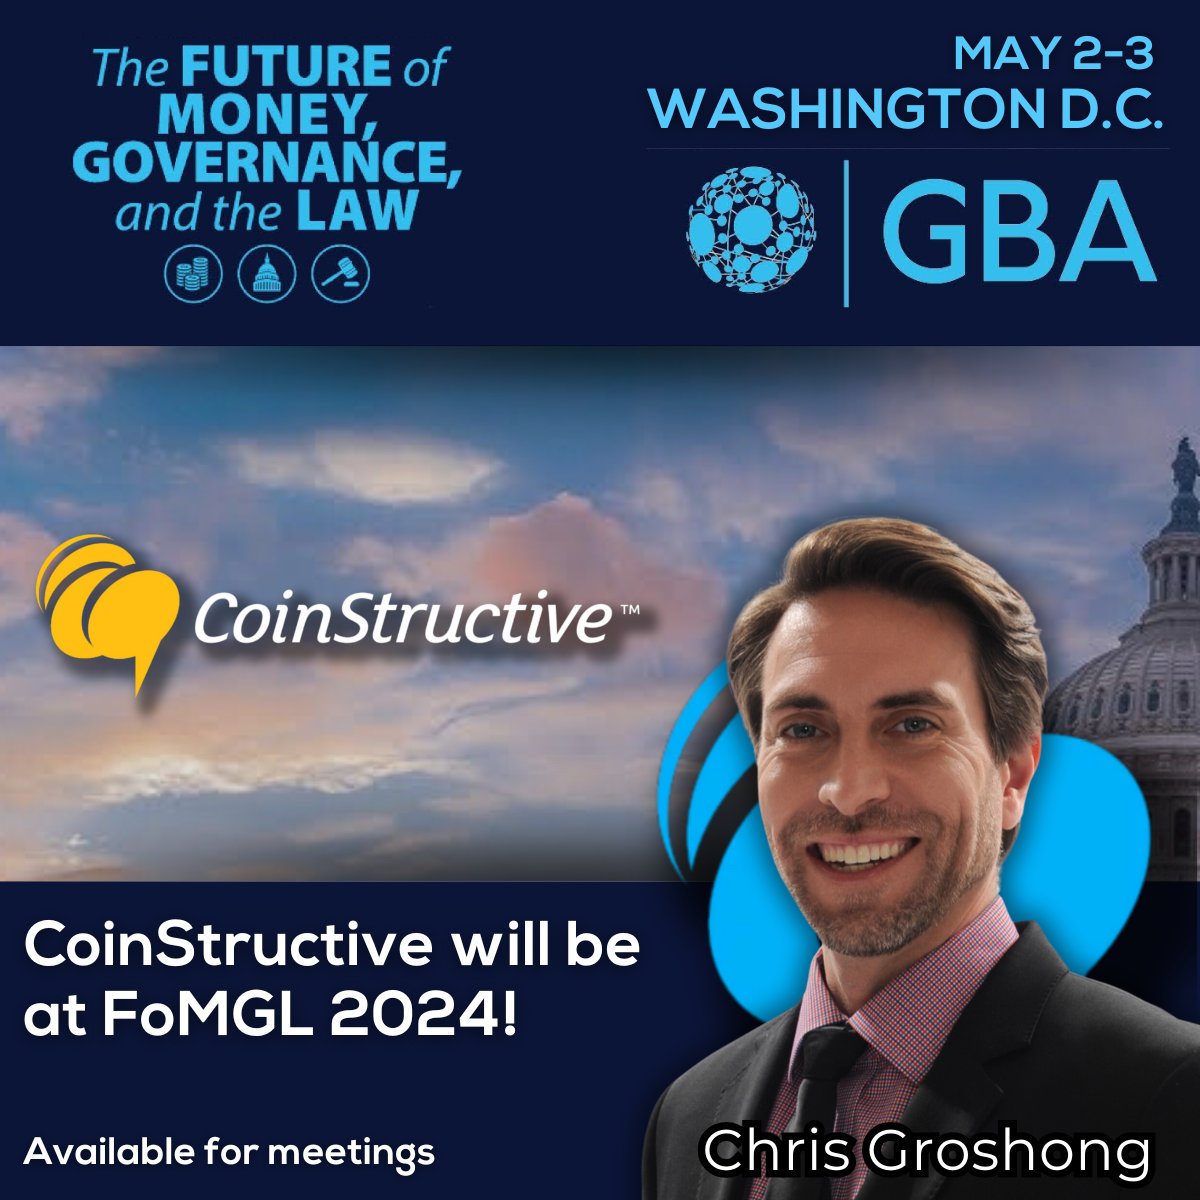 🚨 Conference Alert 🚨 #GBA #FoMGL 📅 May 2-3, 2024 🗺 Washington D.C. @djkinkle will be in #DC to talk shop with #policymakers and innovators. There's plenty more stops for @CoinStructive in #May, so send a #DM to catch us while we're in town.